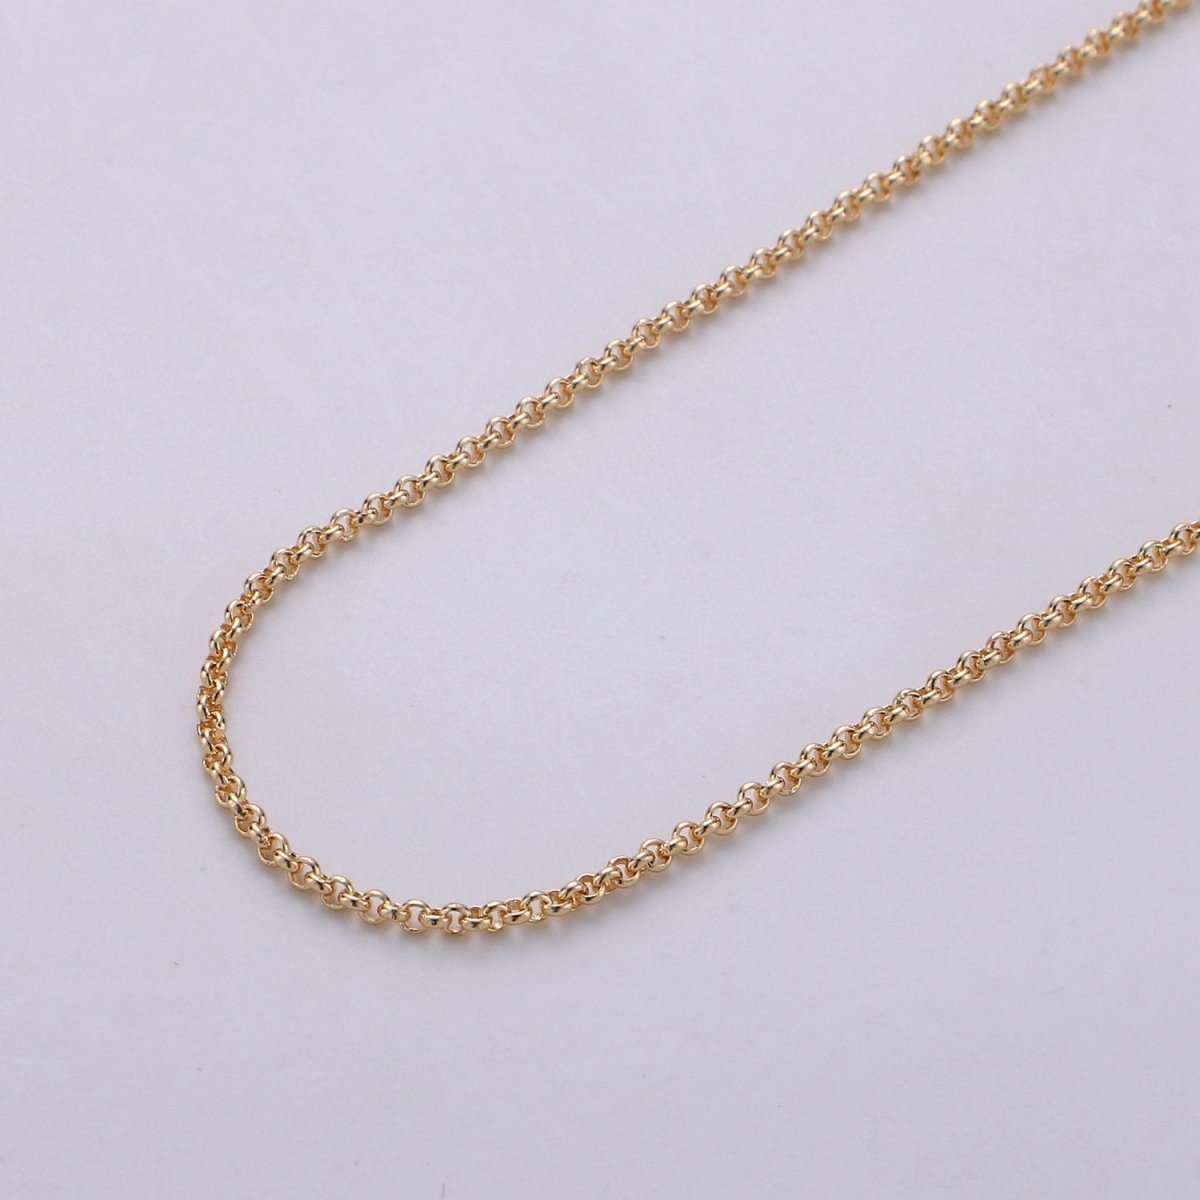 16K Gold Filled ROLO Cable Chain By Yard For Jewelry Making, Lead Free Nickel Free Chain For Necklace Bracelet Anklet Supply Component | ROLL-277 Clearance Pricing - DLUXCA